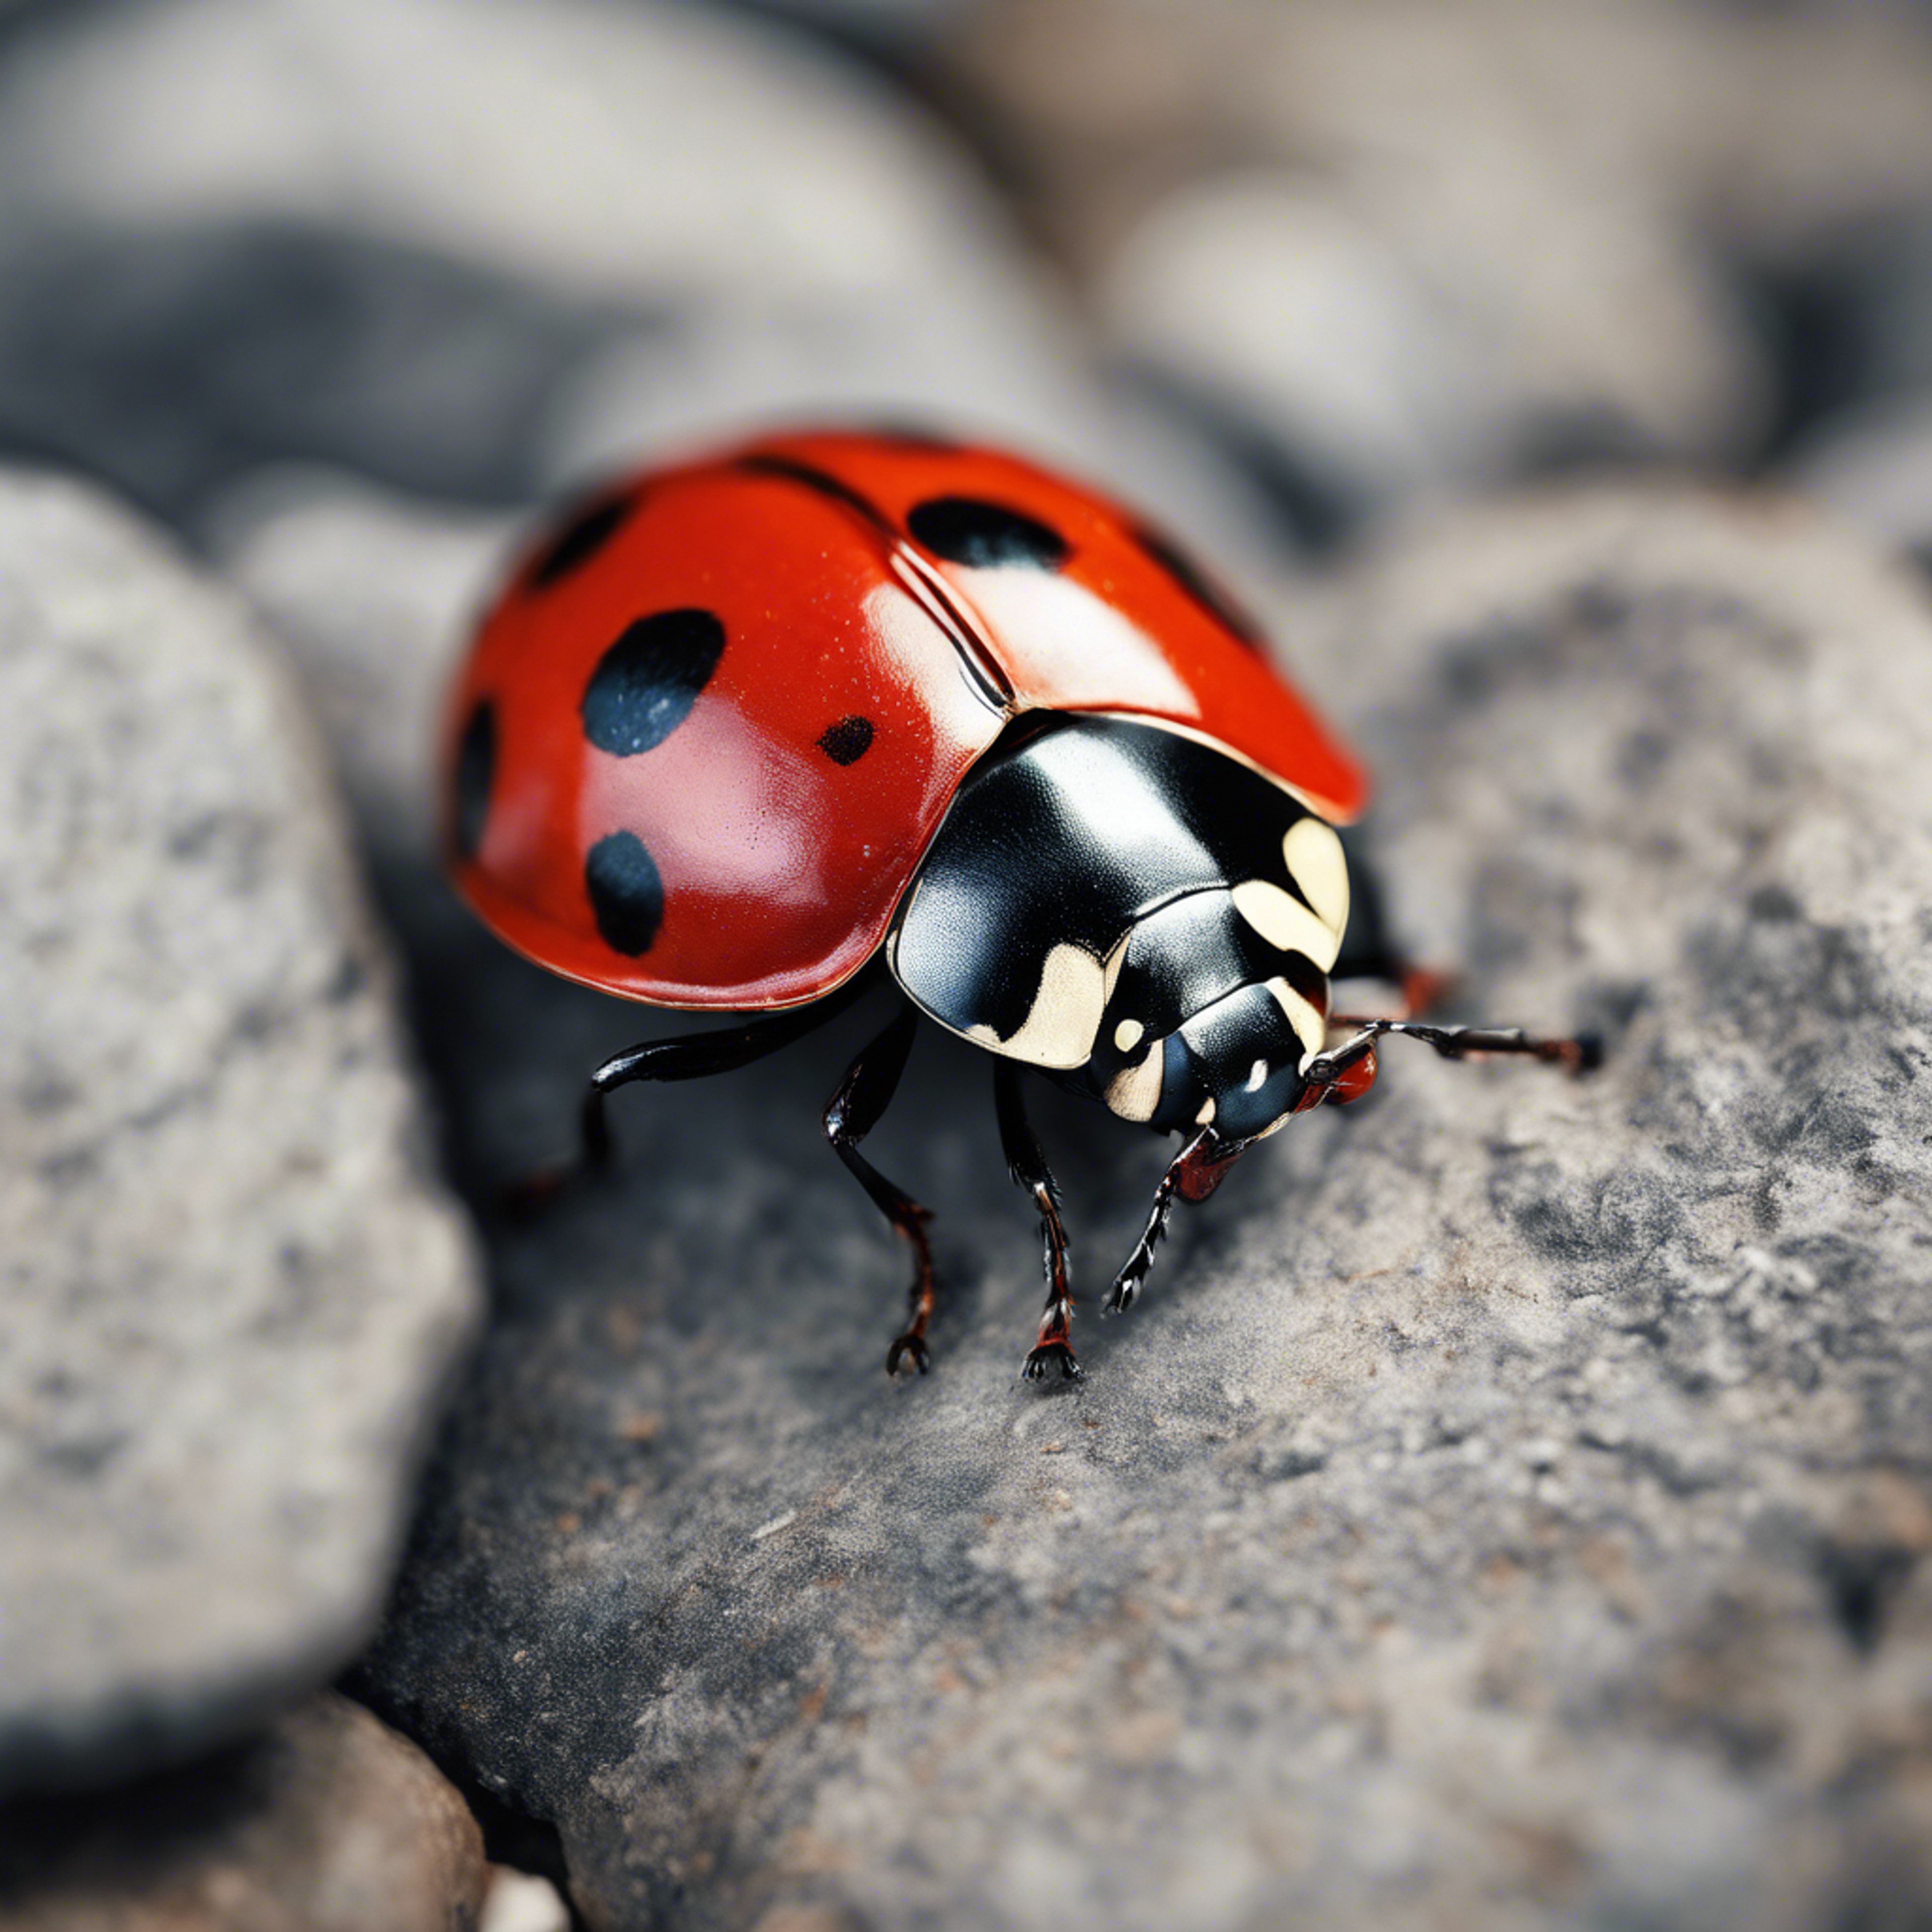 A fearless ladybug with bright red wings crawling over a dull, grey stone. 벽지[cb02e673ce6f479eab40]